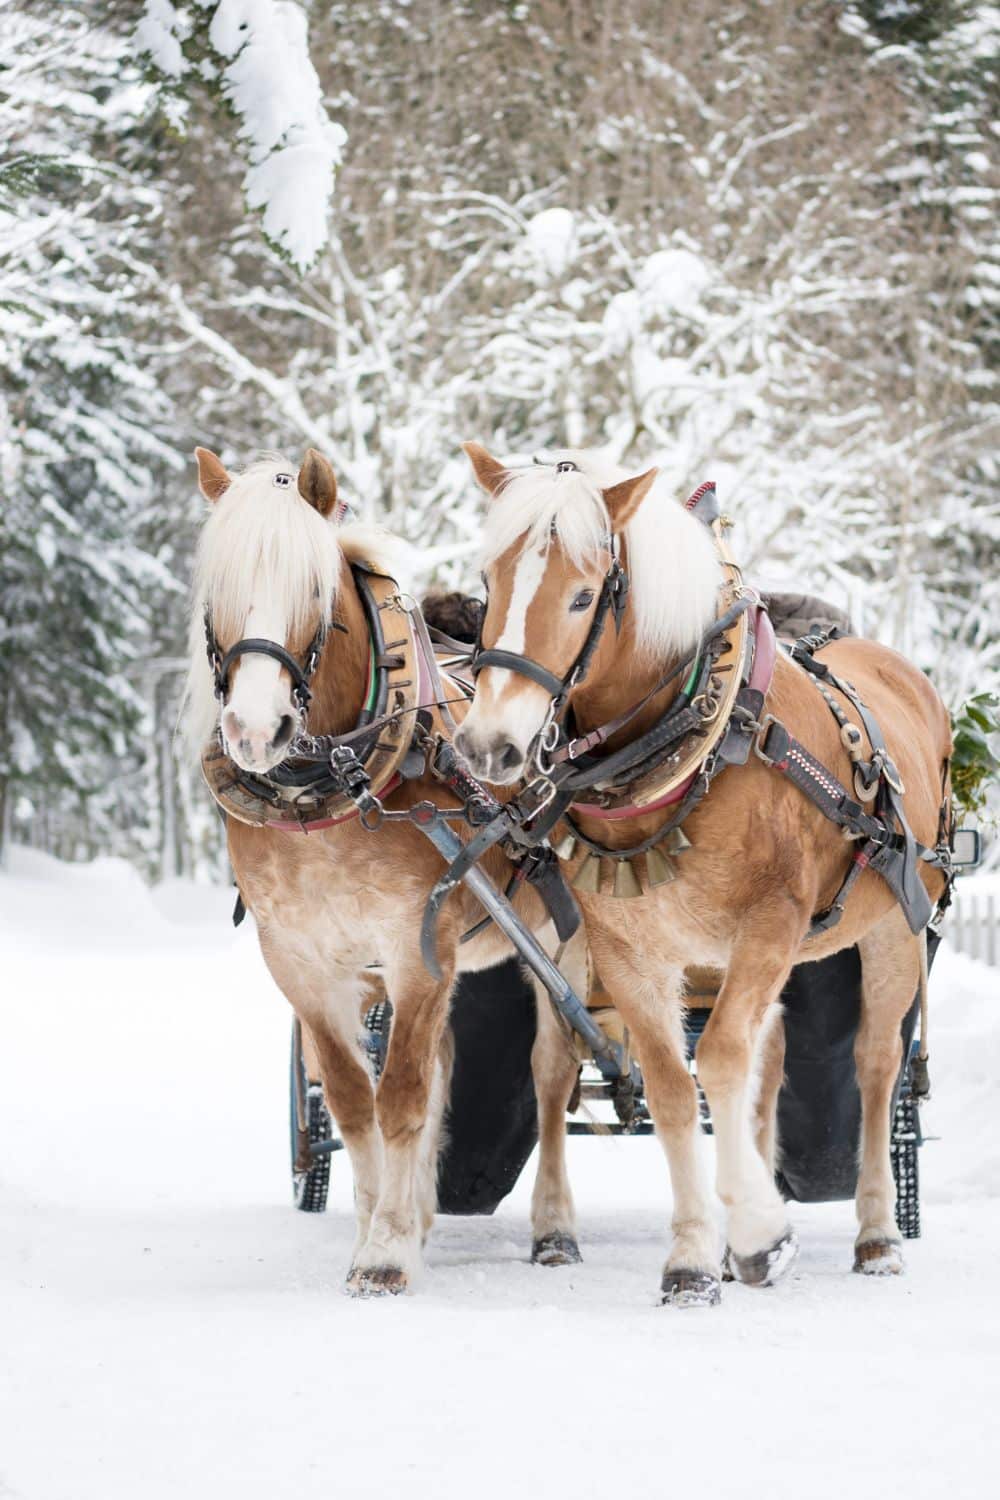 Two Haflinger horses harnessed to a sleigh, ready for a winter ride through a snow-laden forest.